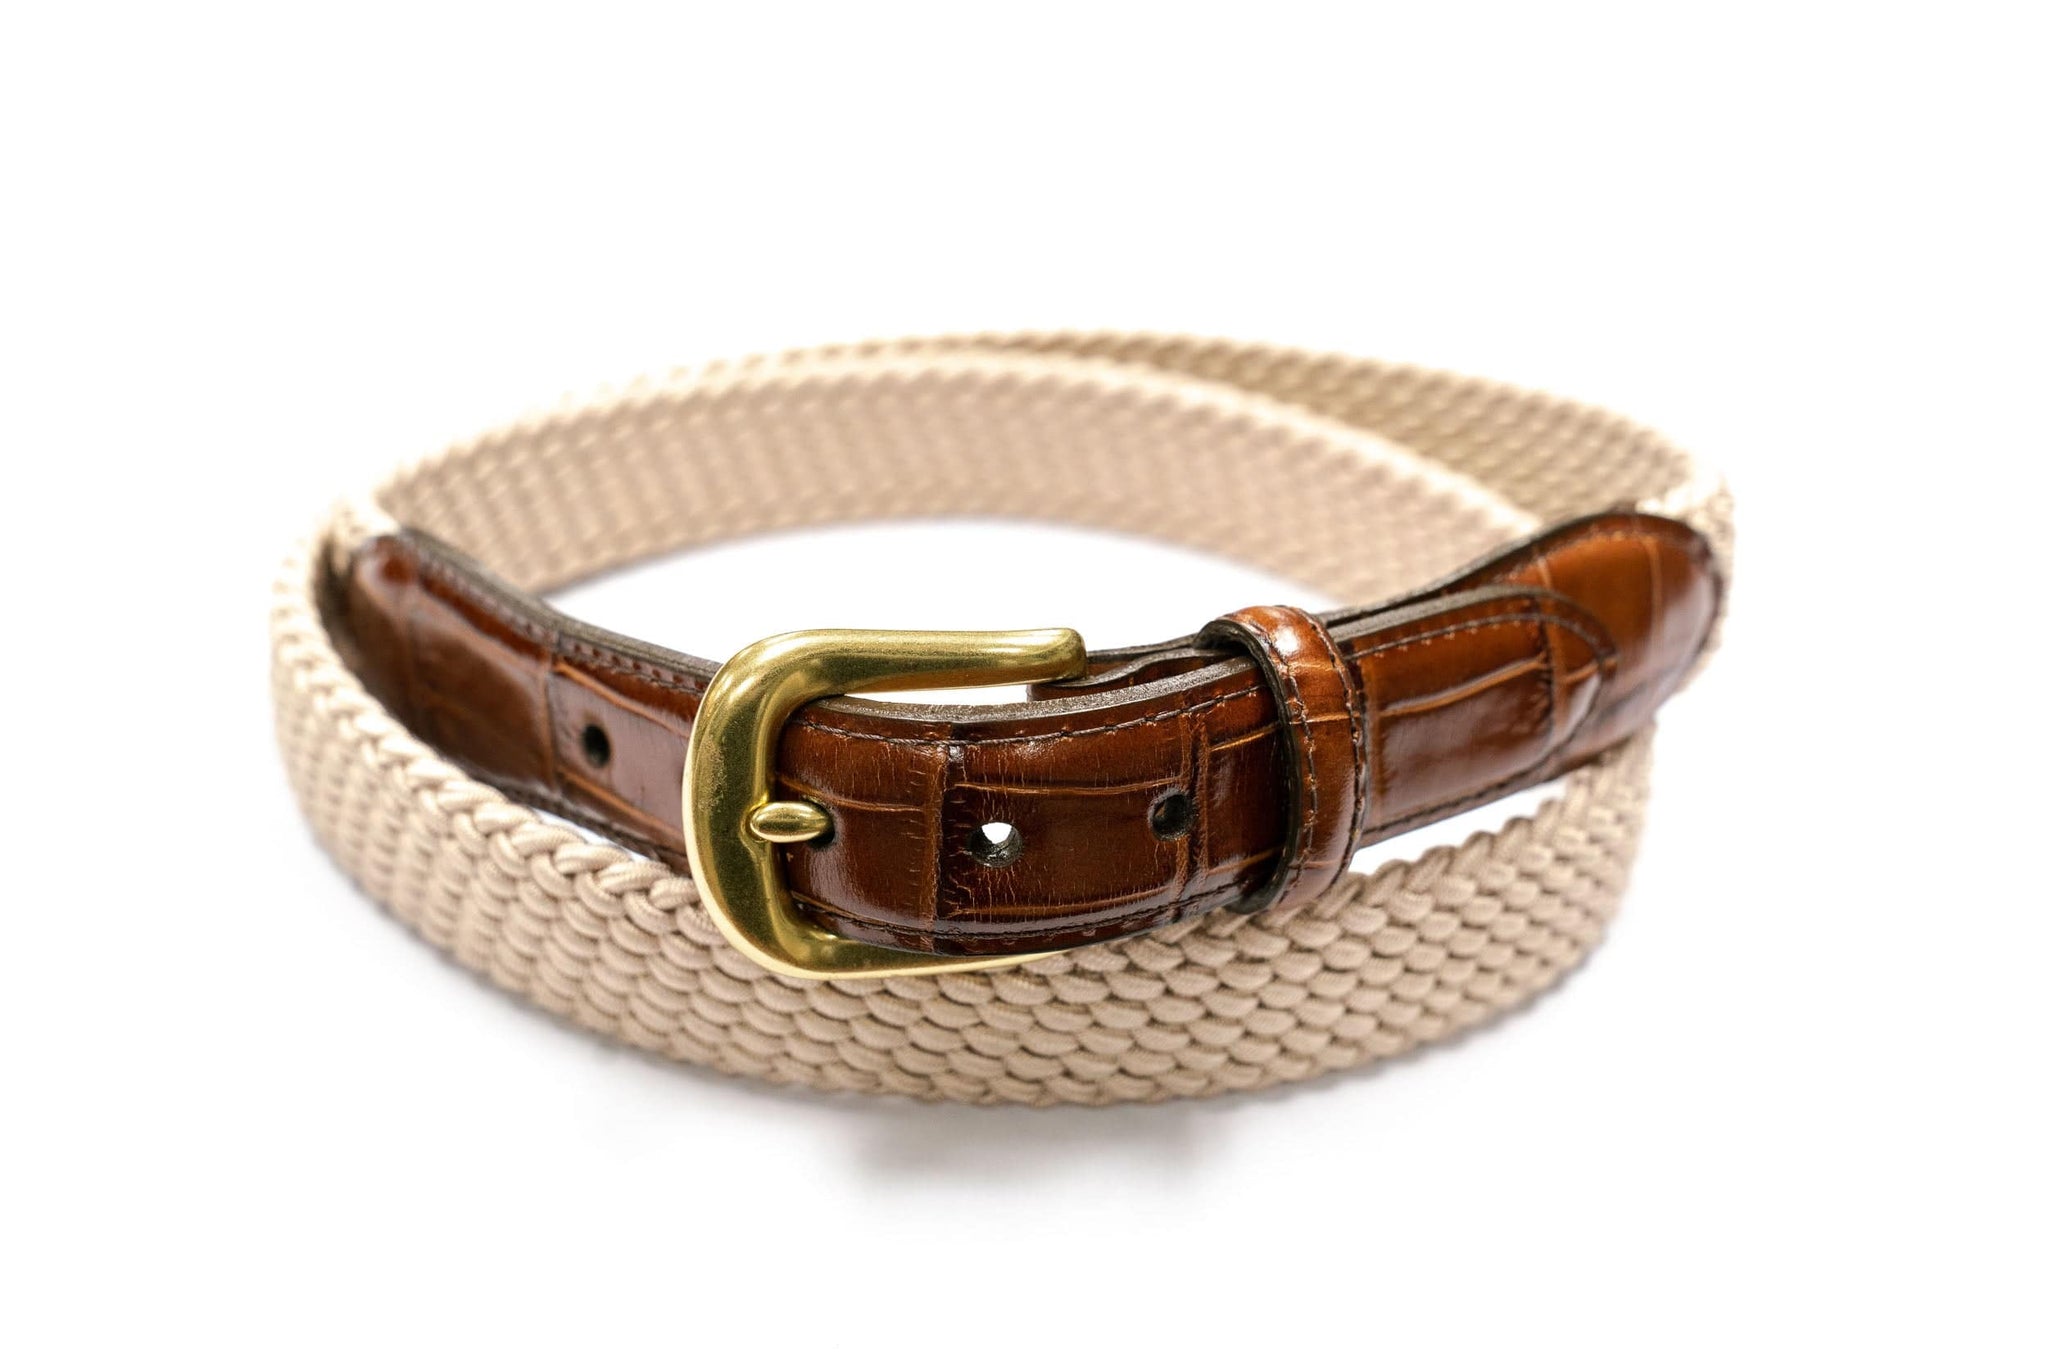 Brighton Braided Stretch Belt with Croco Leather in Beige - Rainwater's Men's Clothing and Tuxedo Rental